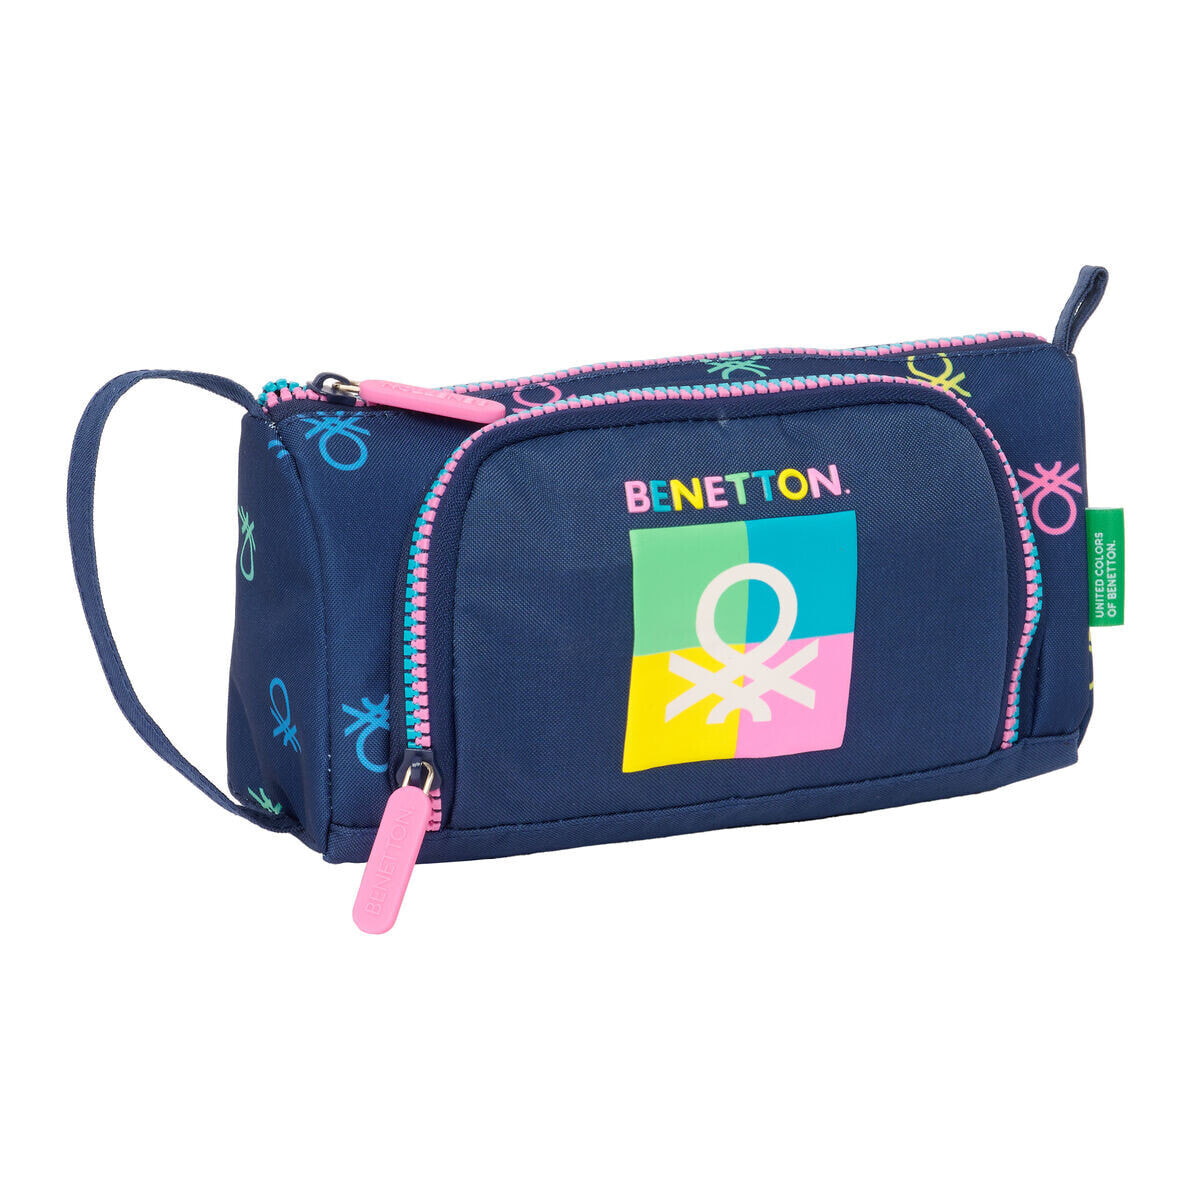 School Case with Accessories Benetton Cool Navy Blue 20 x 11 x 8.5 cm (32 Pieces)